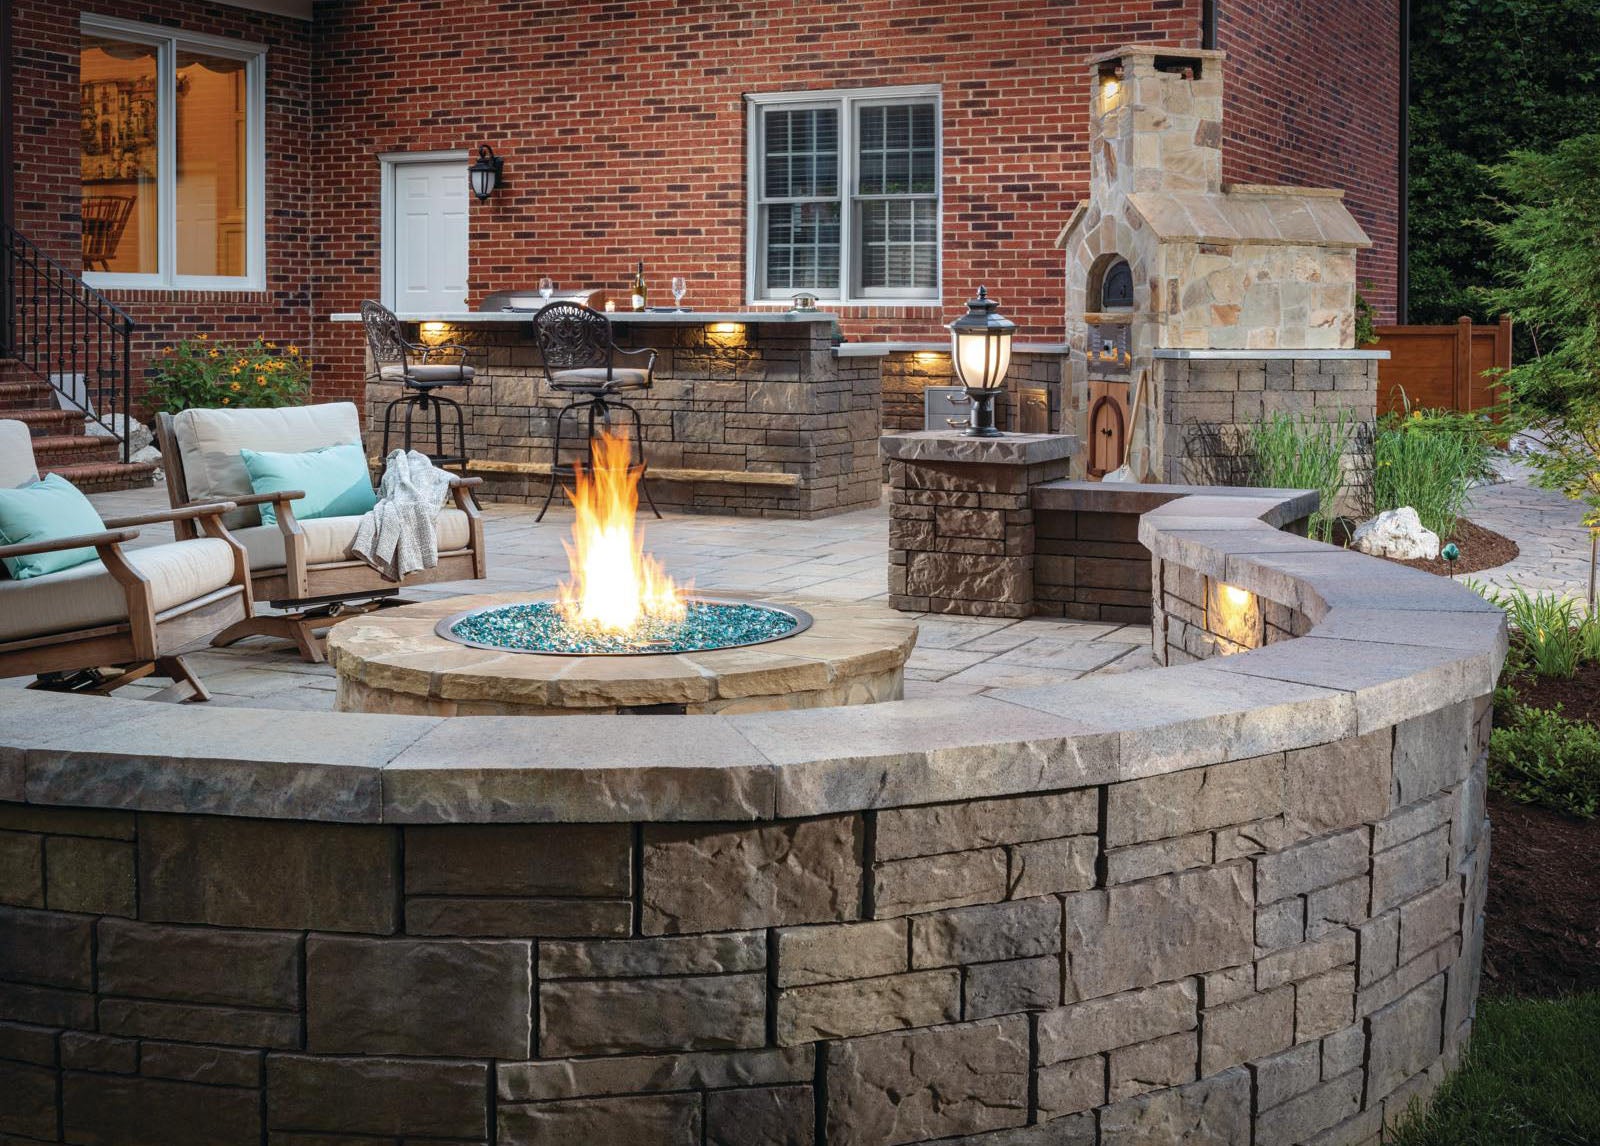 Designing A Patio Around Fire Pit, Patio Fire Pit Area